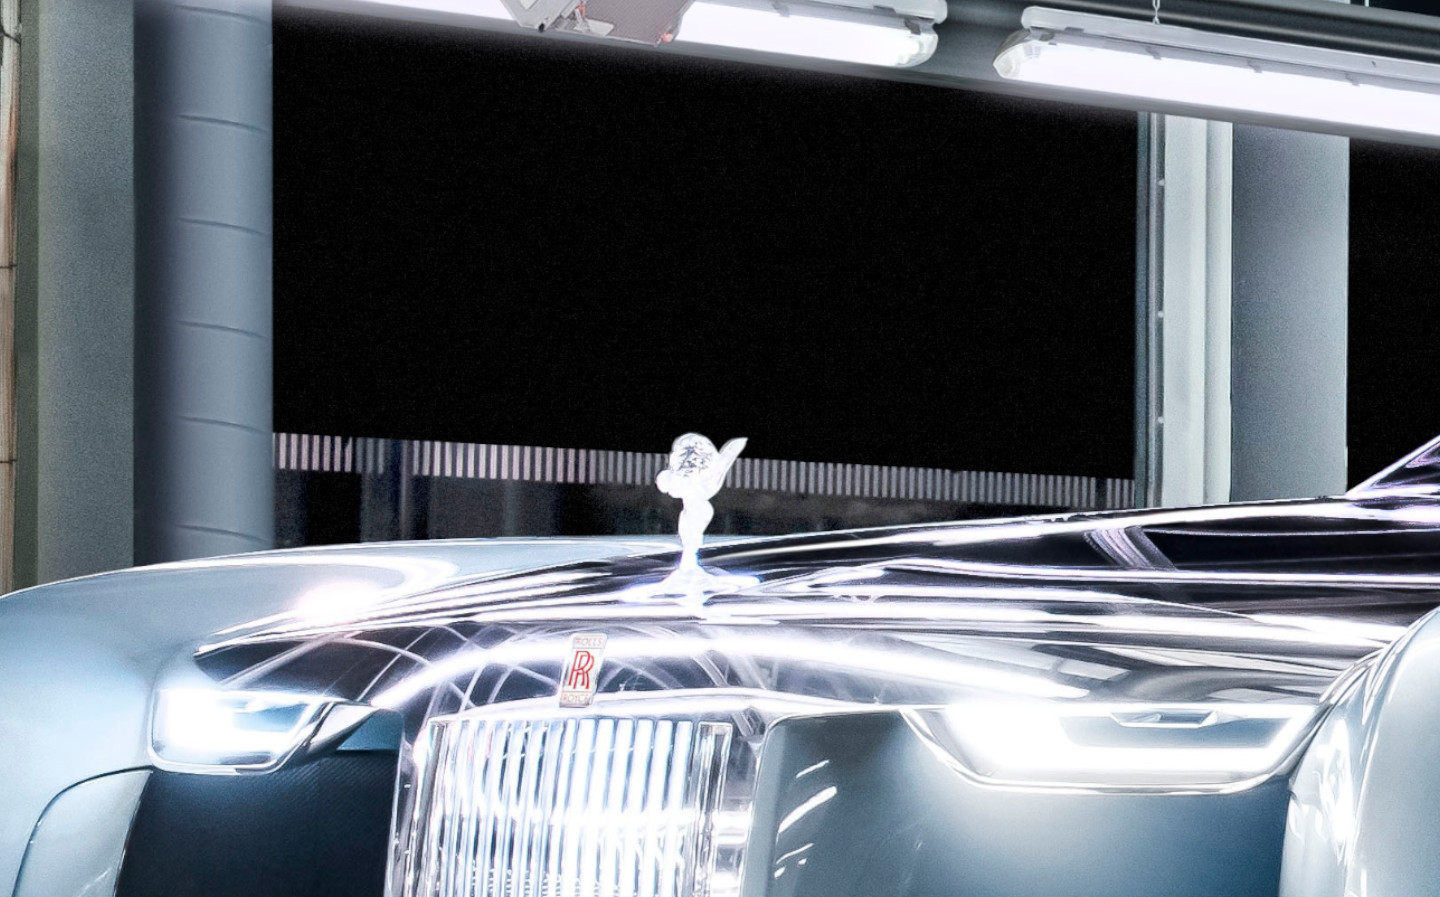 Illuminated Spirit of Ecstasy banned from Rolls-Royce cars